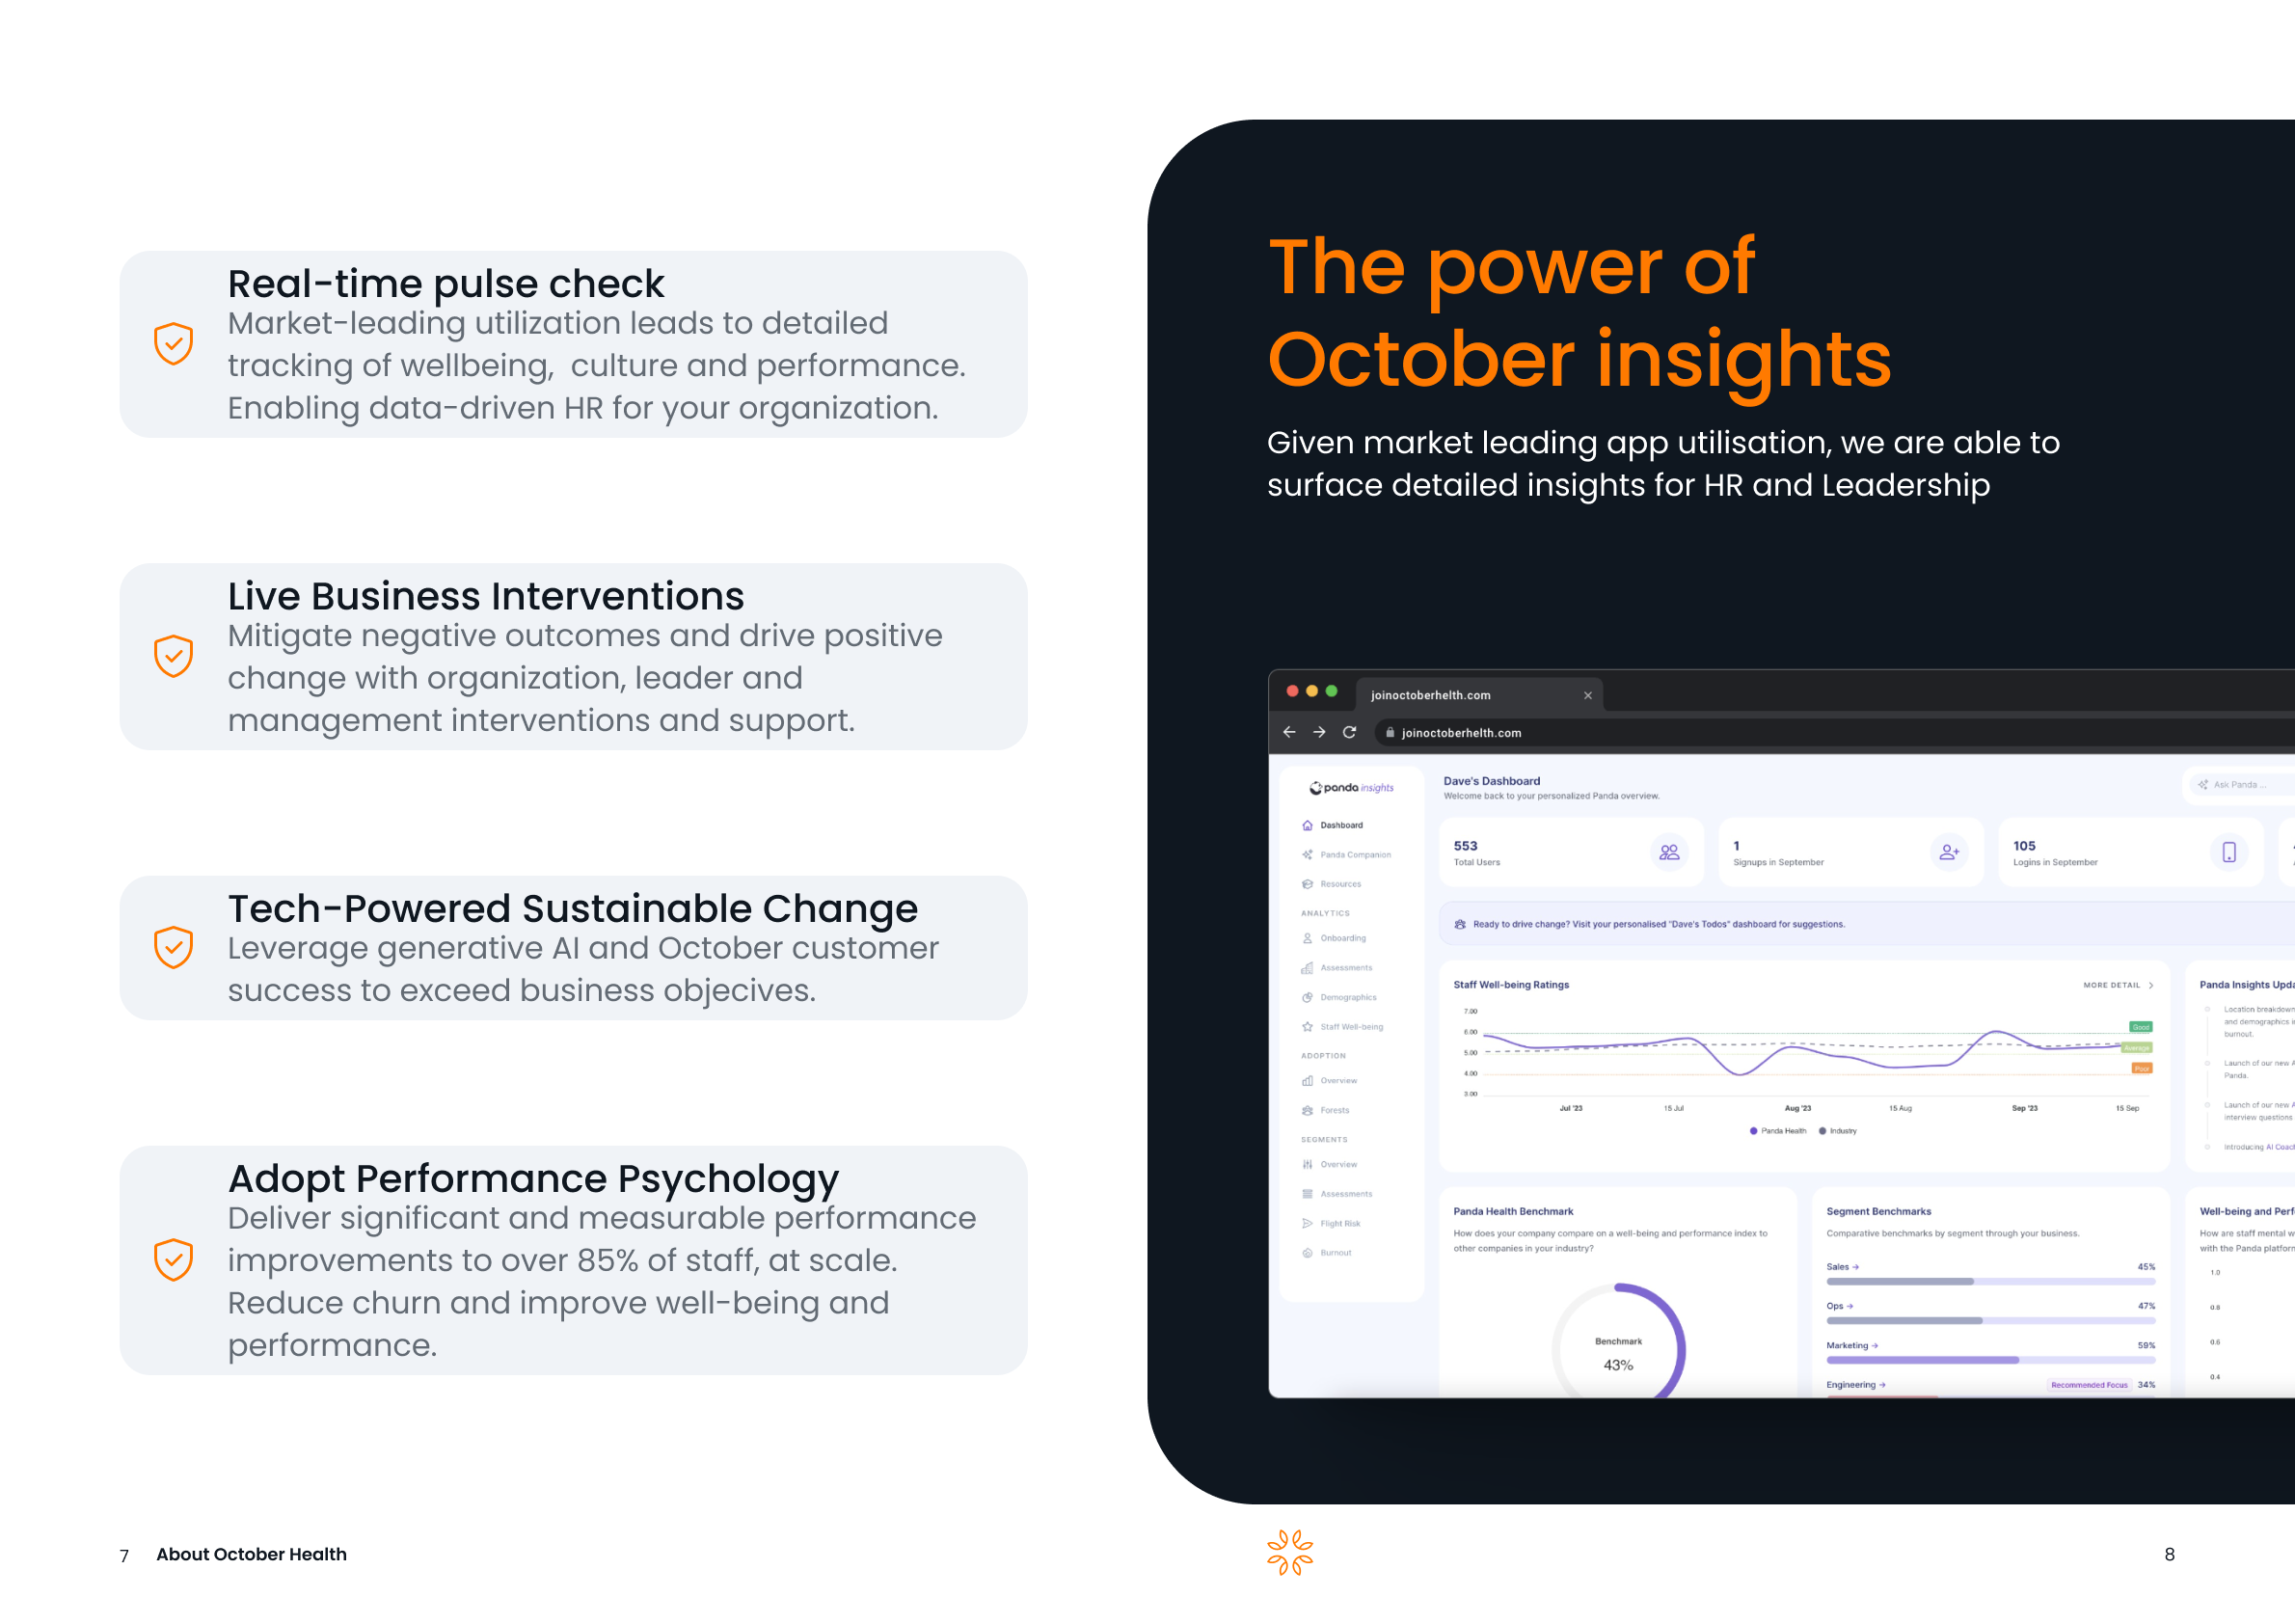 Introducing October Insights